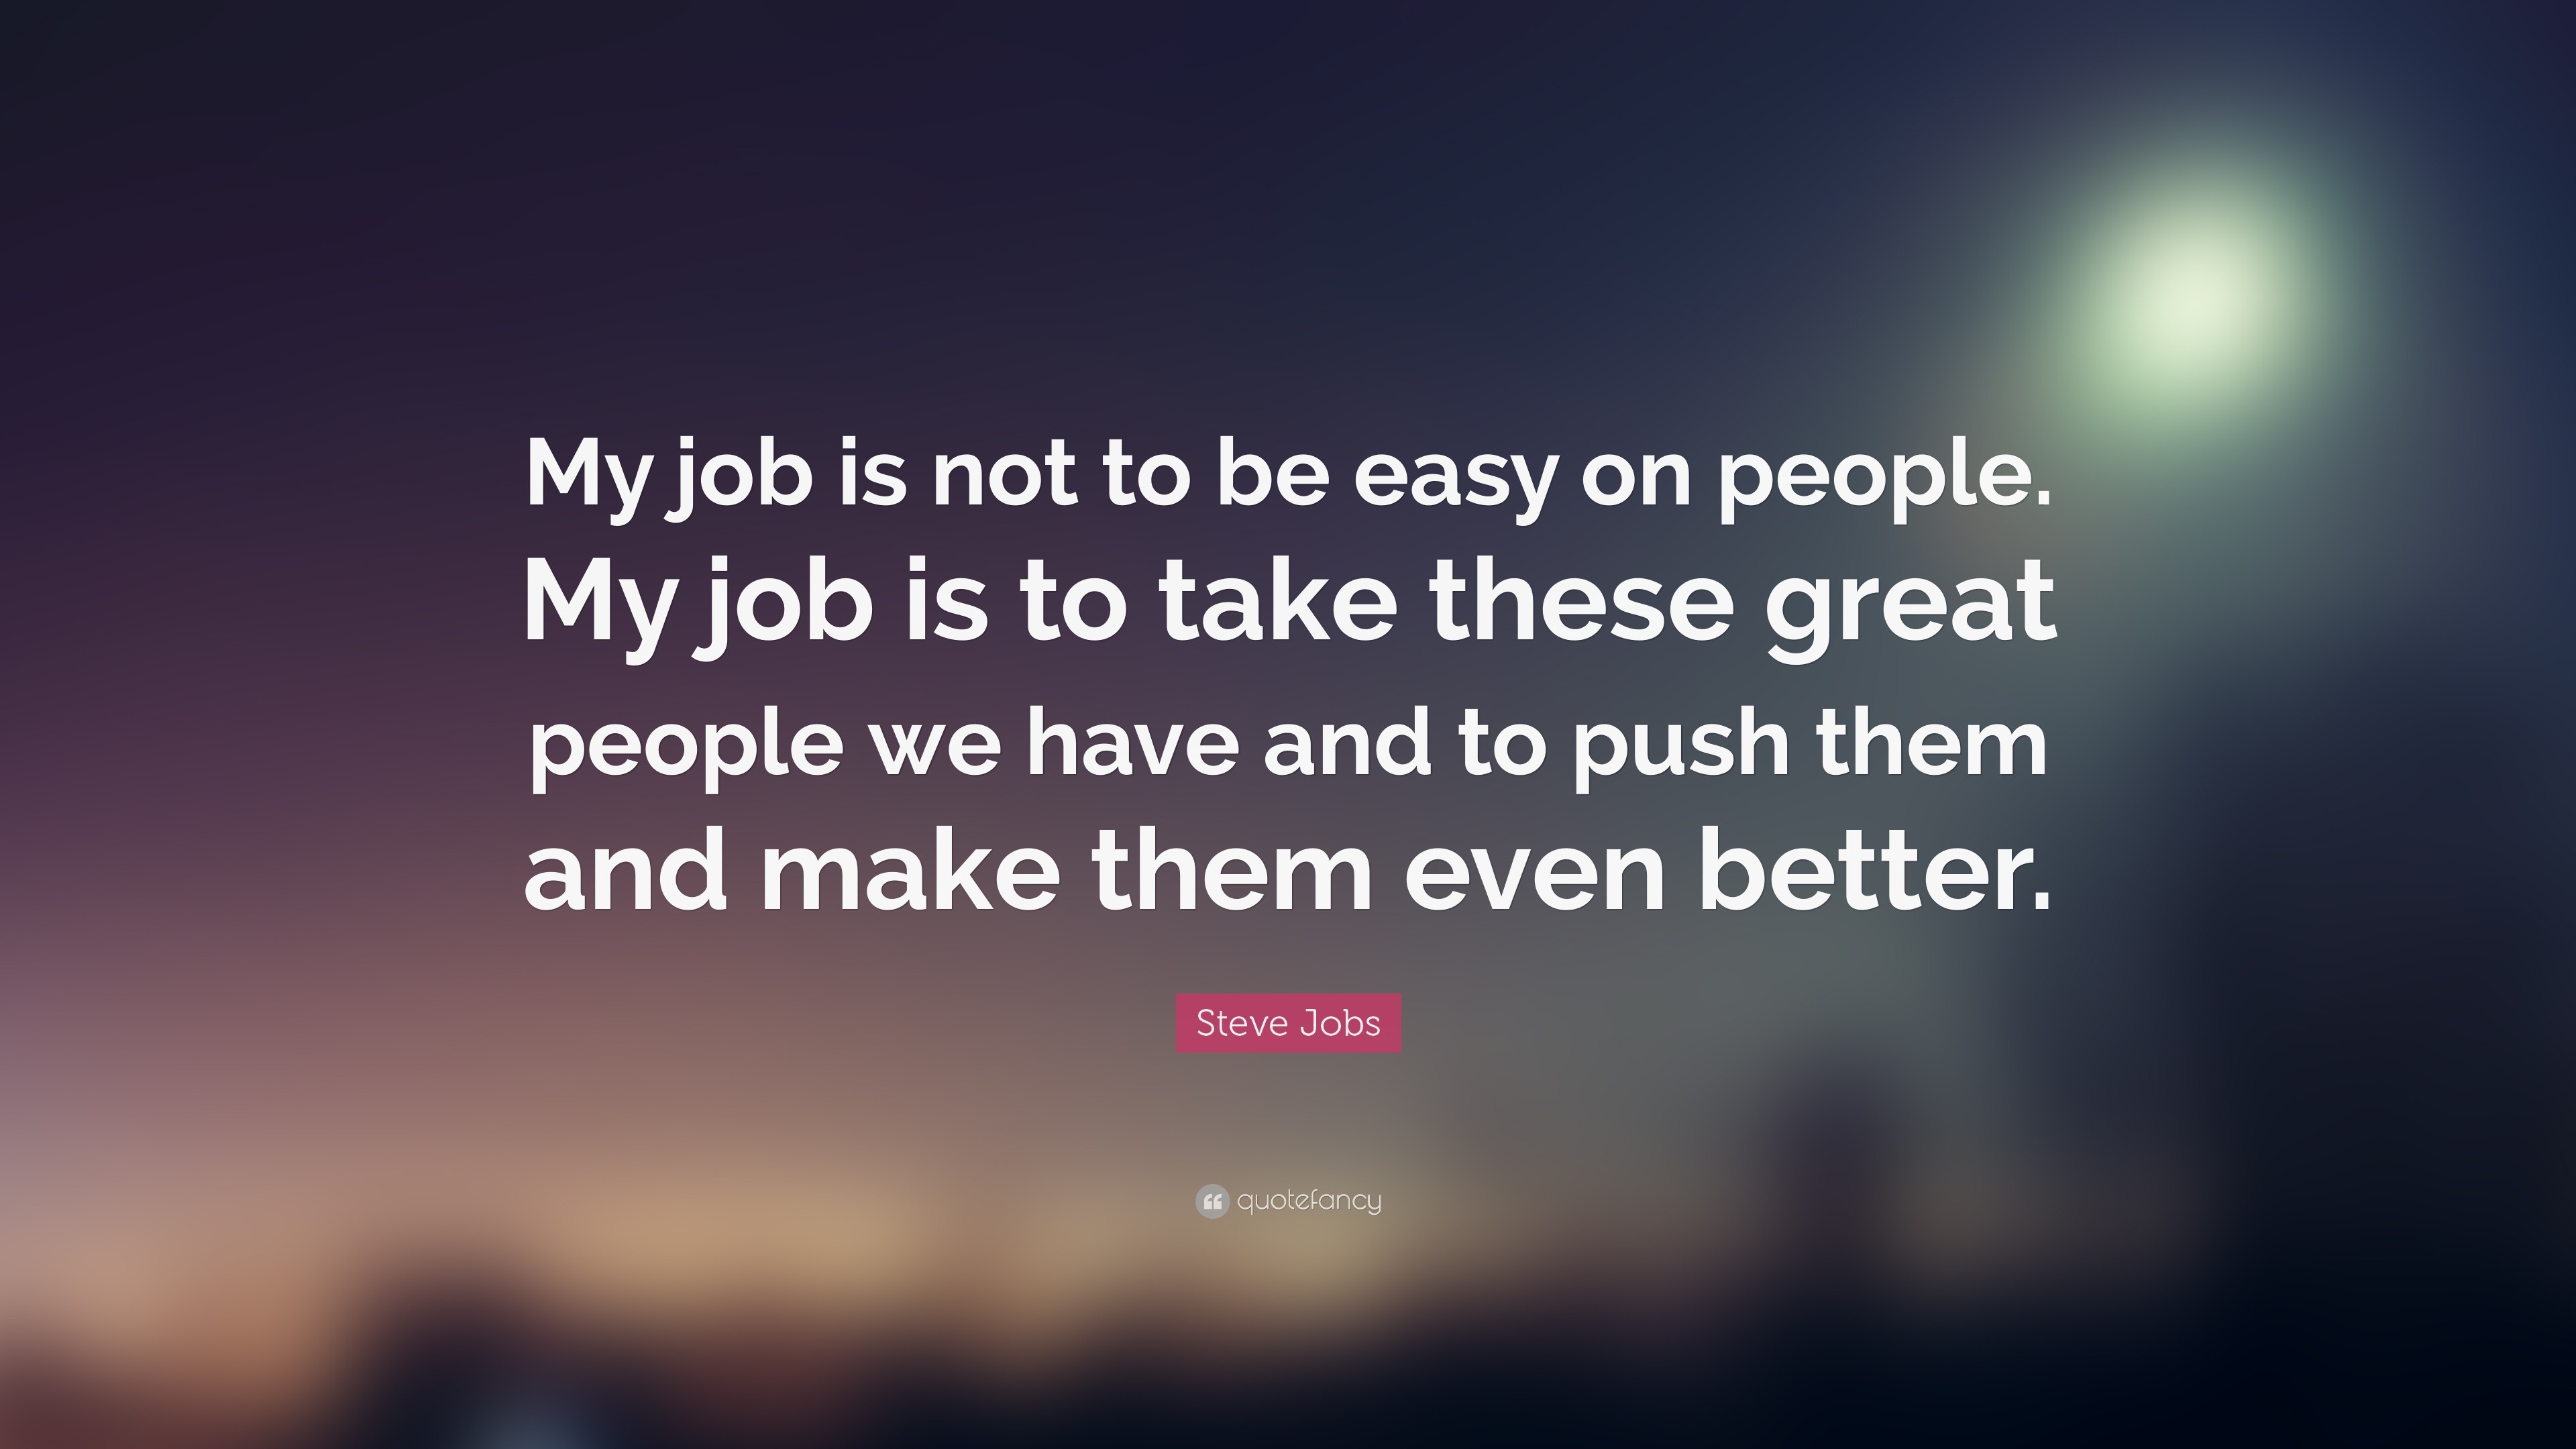 Steve Jobs Quote: “My job is not to be easy on people. My job is to take these great people we have and to push them and make them even bet...”